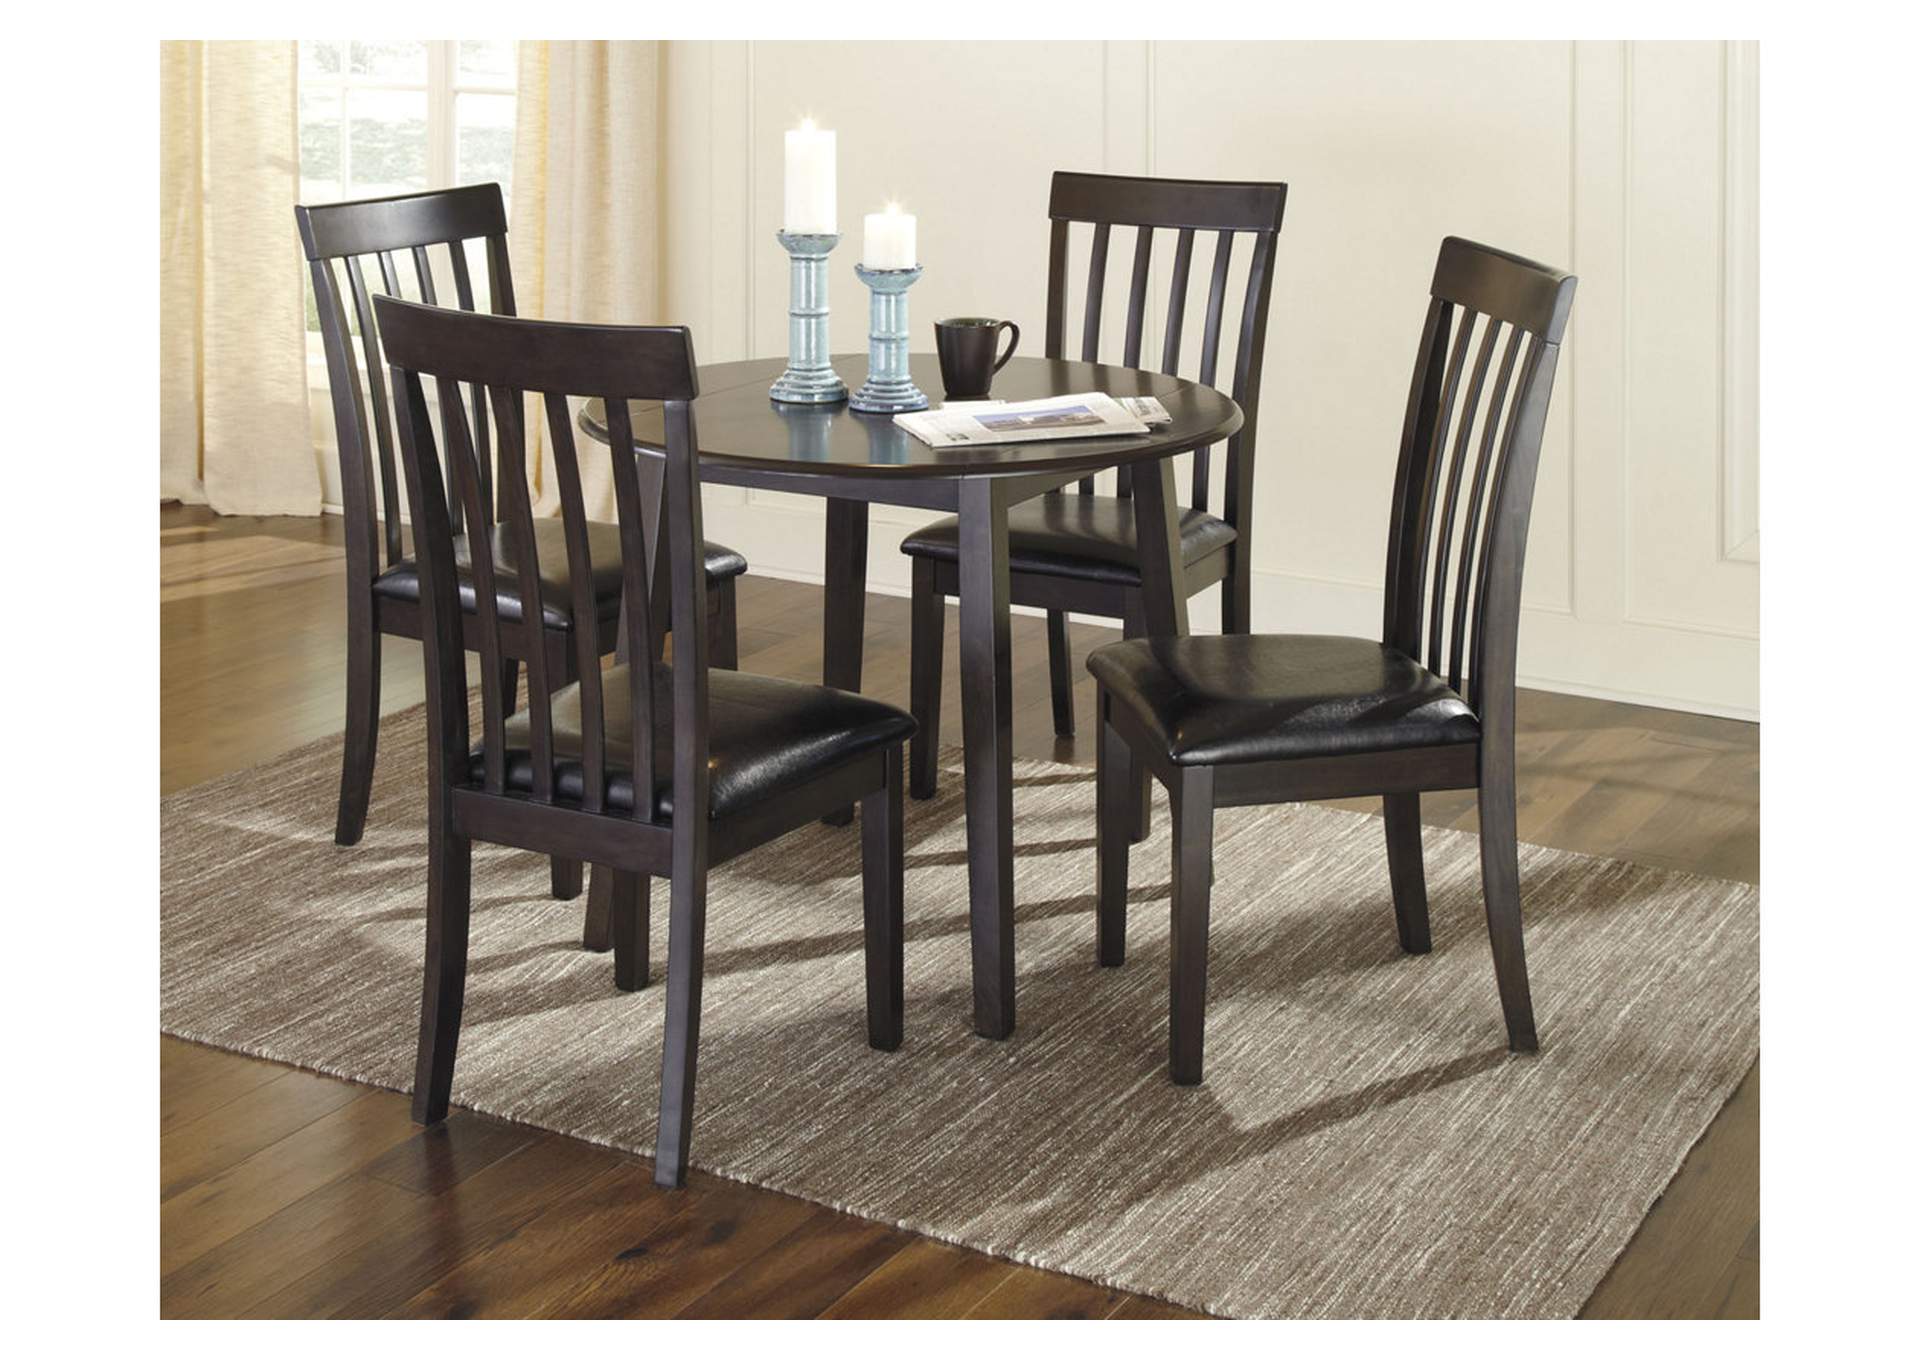 Hammis Dining Chair (Set of 2),Signature Design By Ashley